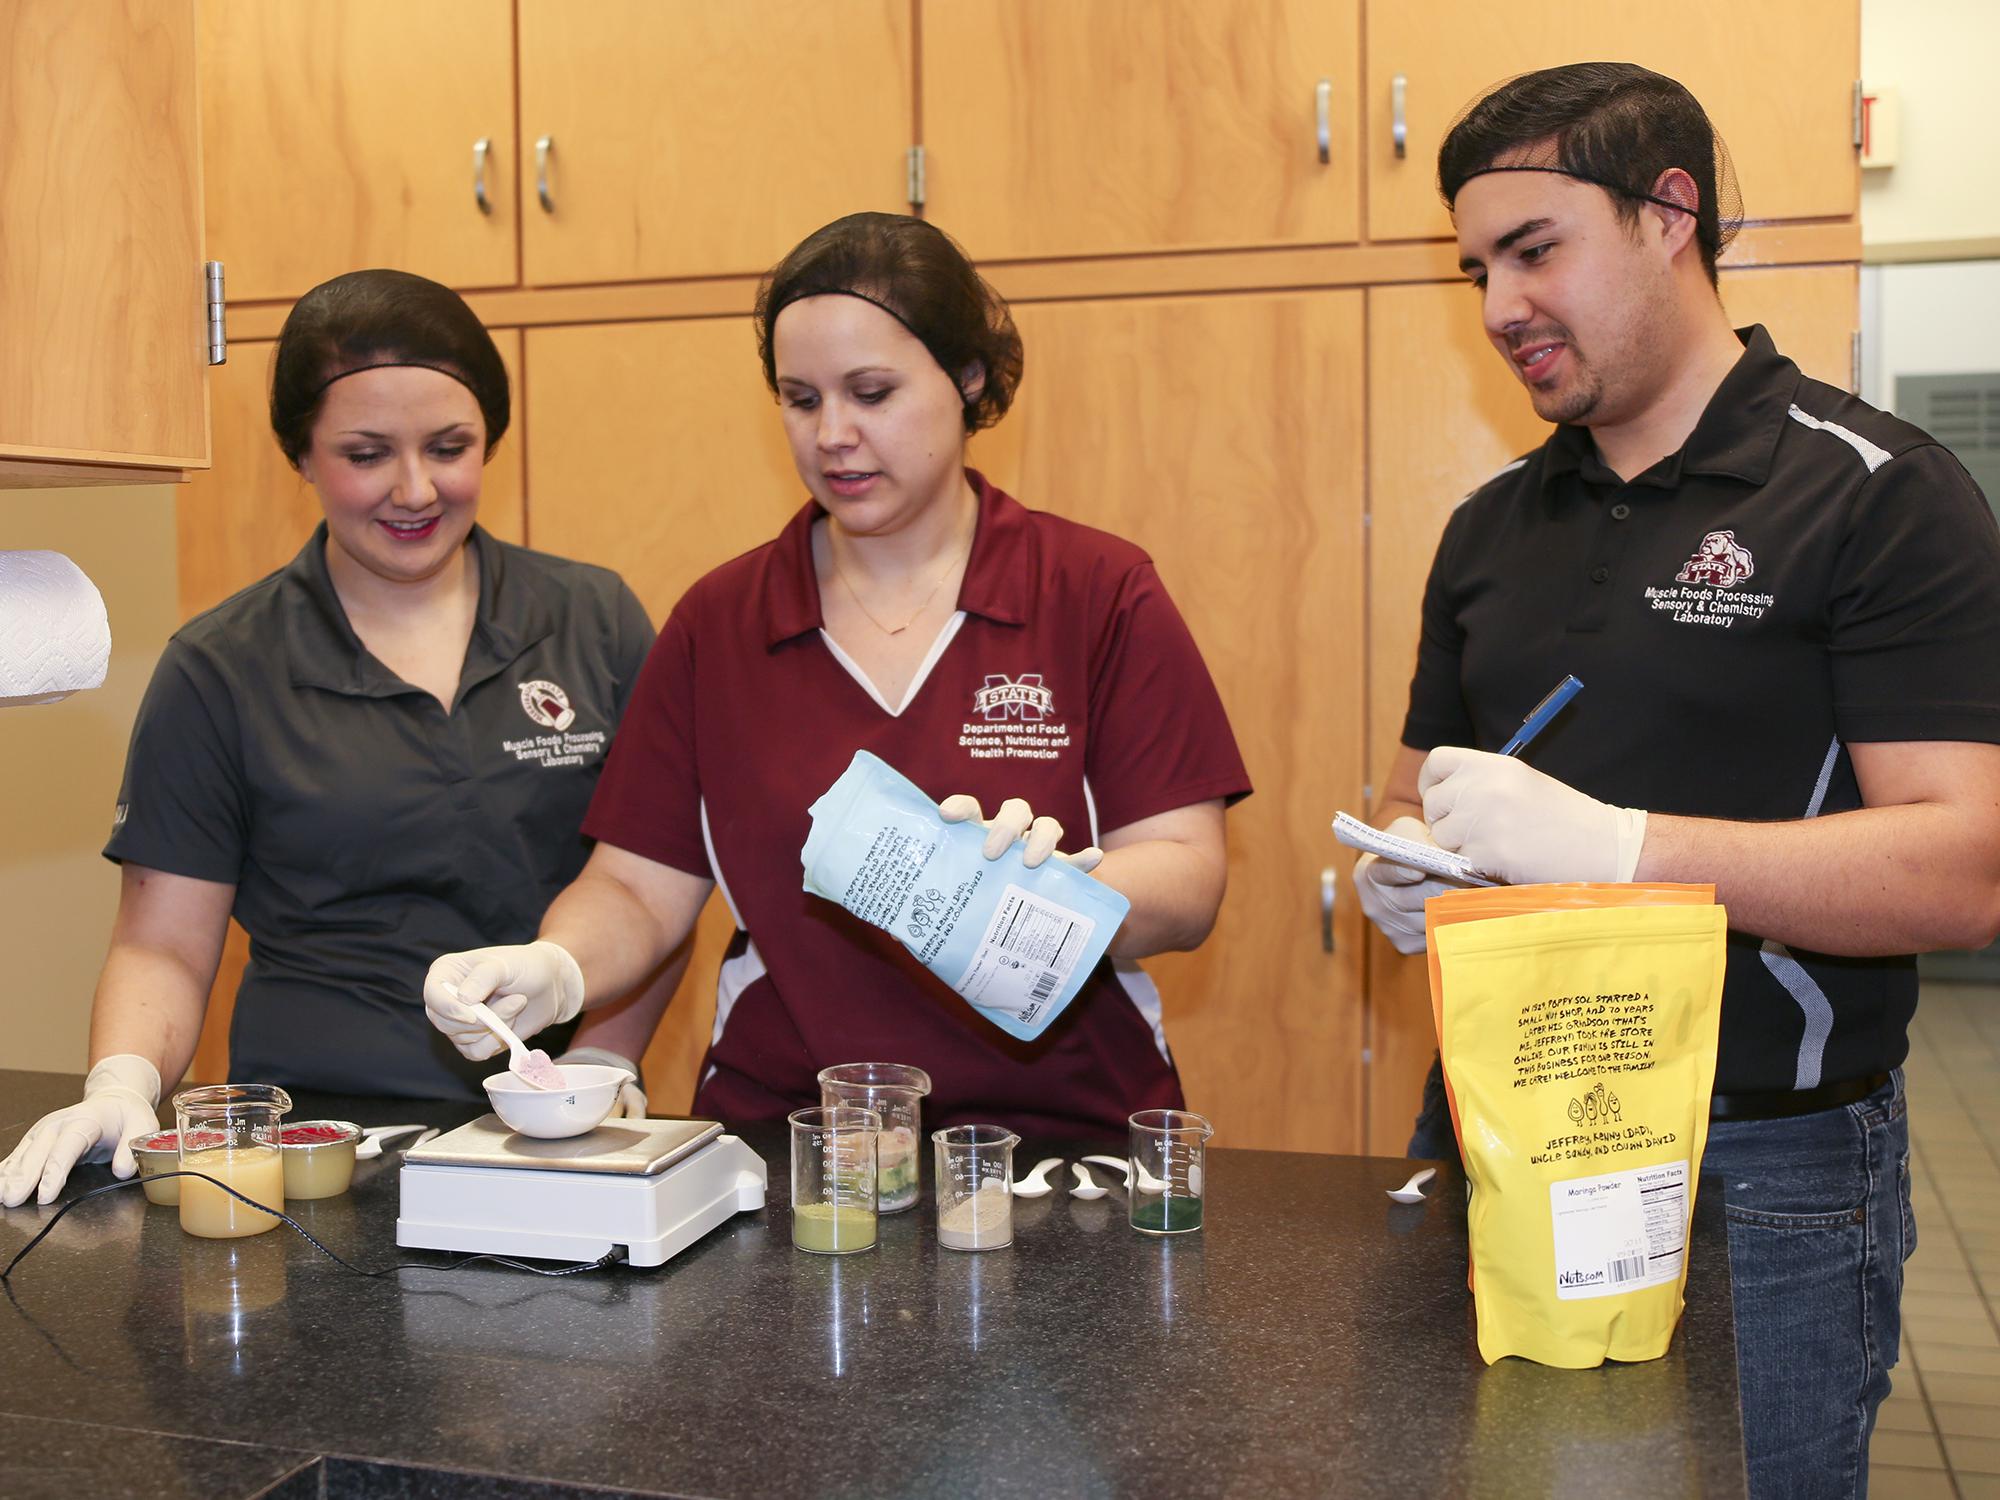 Mississippi State University junior Morgan Von Staden of Olive Branch, Mississippi, and graduate students Liz Ivey of Cumming, Georgia and Hector Portillo of Sarasota, Florida are members of a Department of Food Science, Nutrition and Health Promotion student team developing a product made of culled sweet potatoes that cafeterias could use to increase the nutritional value of school lunches. (Photo by MSU Extension Service, Kat Lawrence)